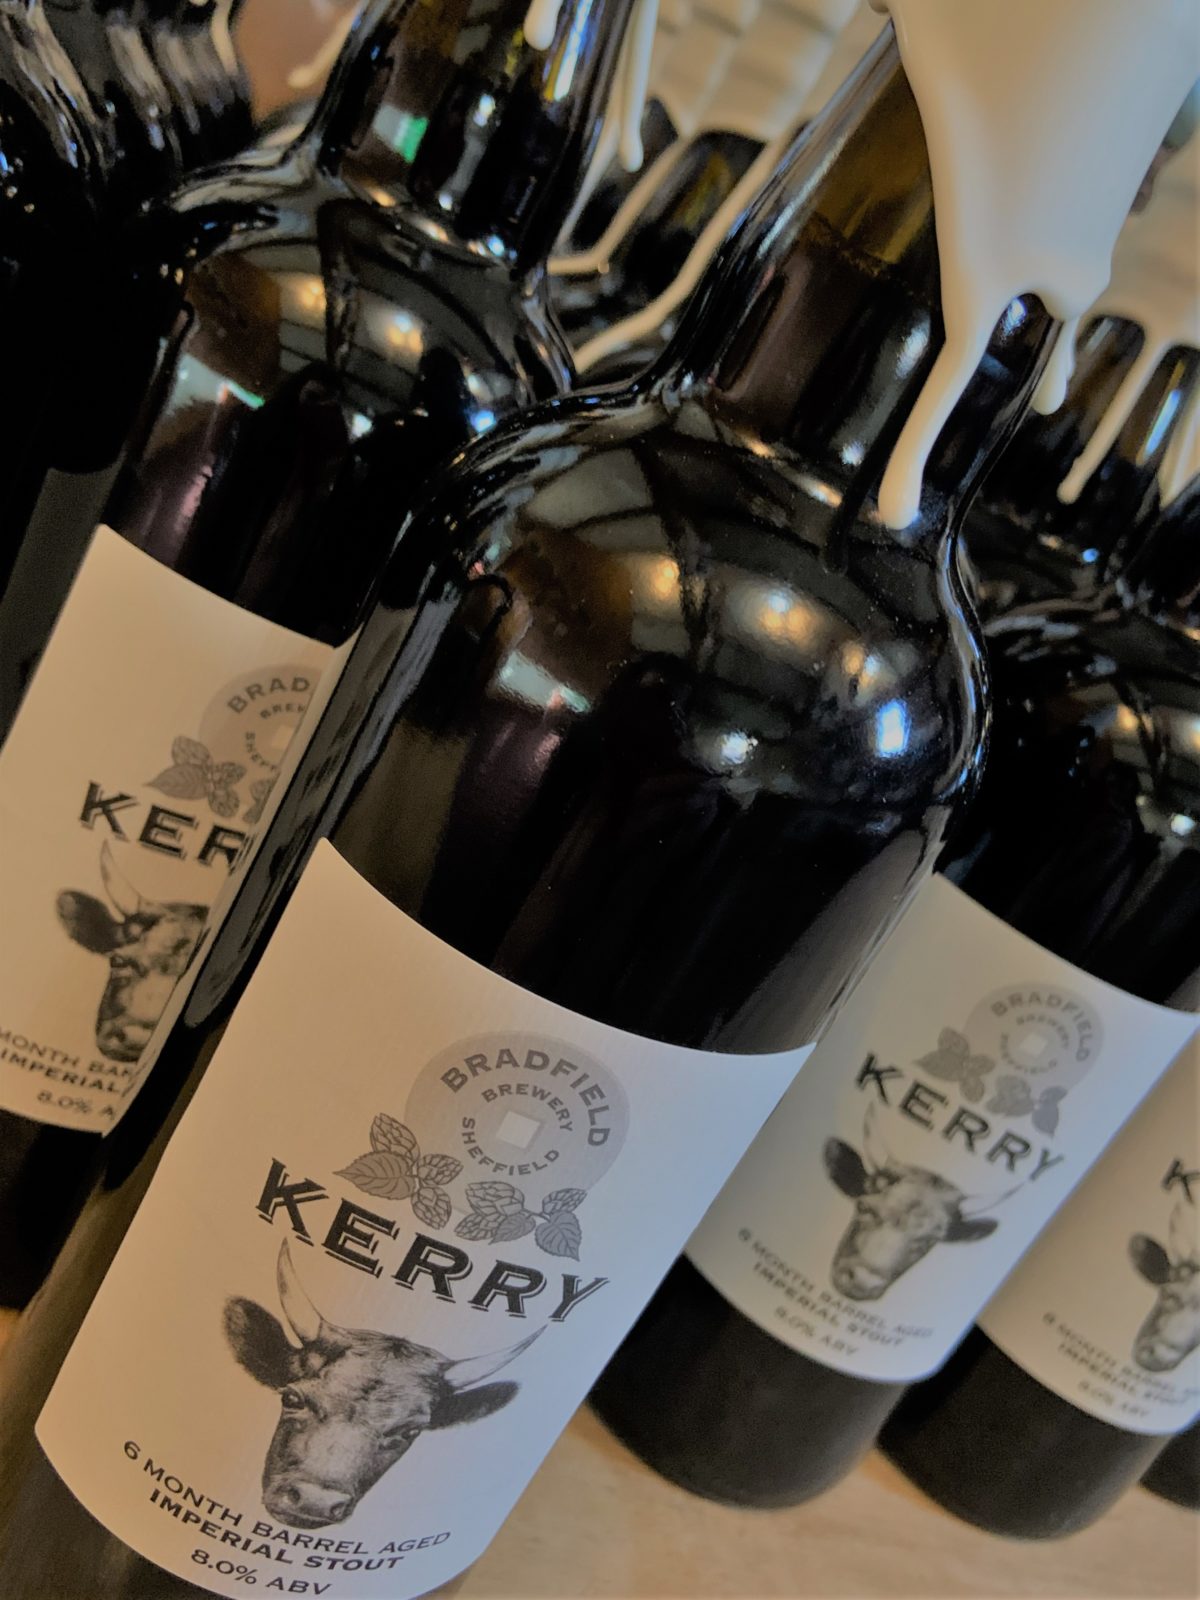 Farmers Kerry Stout, 12 Month Barrel Aged, Limited Edition Available Now!